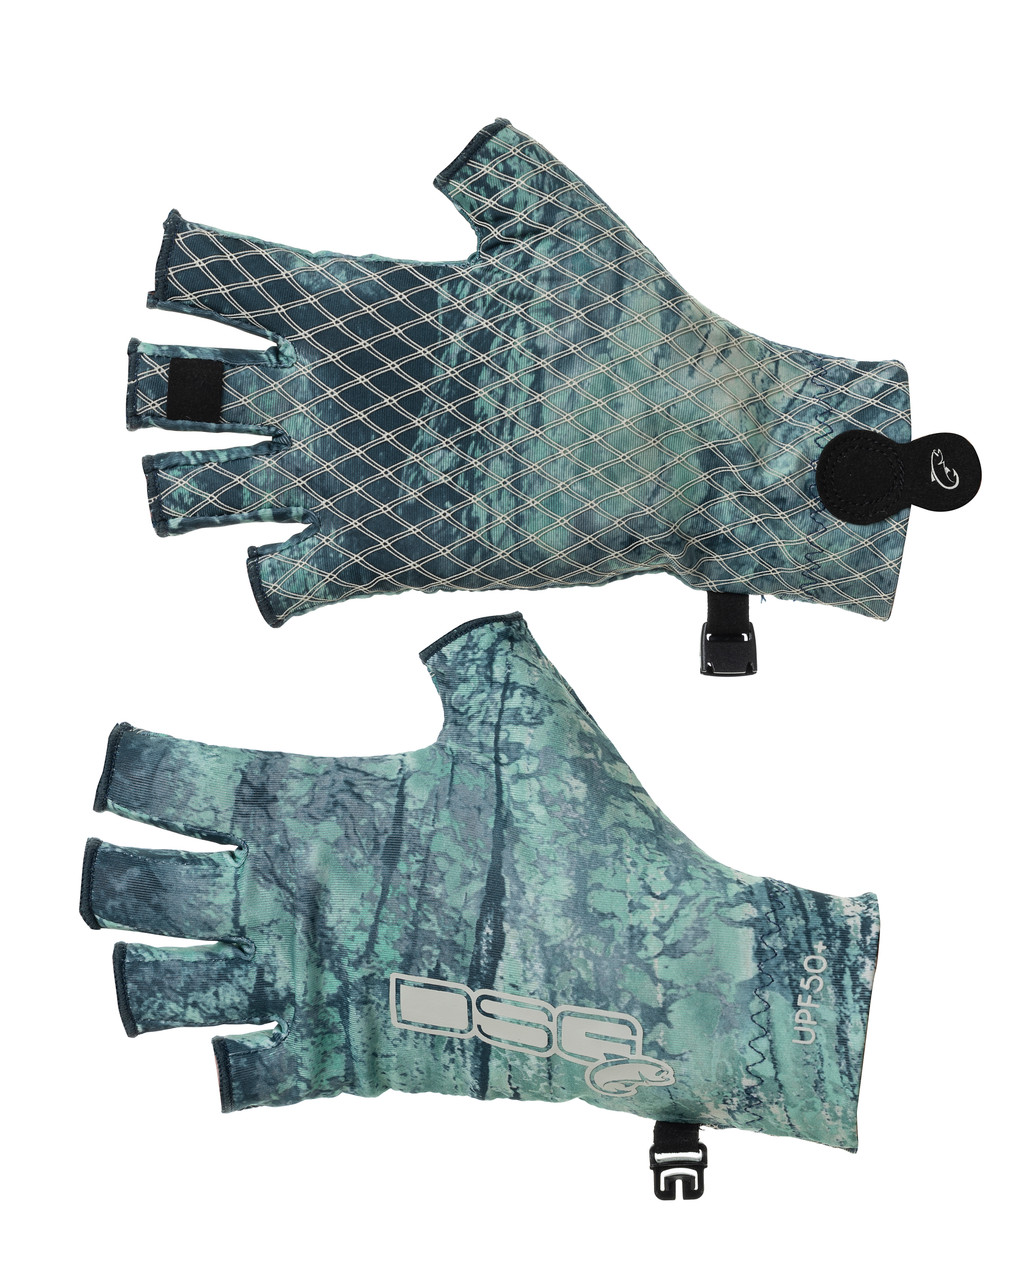 25% off all fishing equipment and supplies 50% off gloves pants